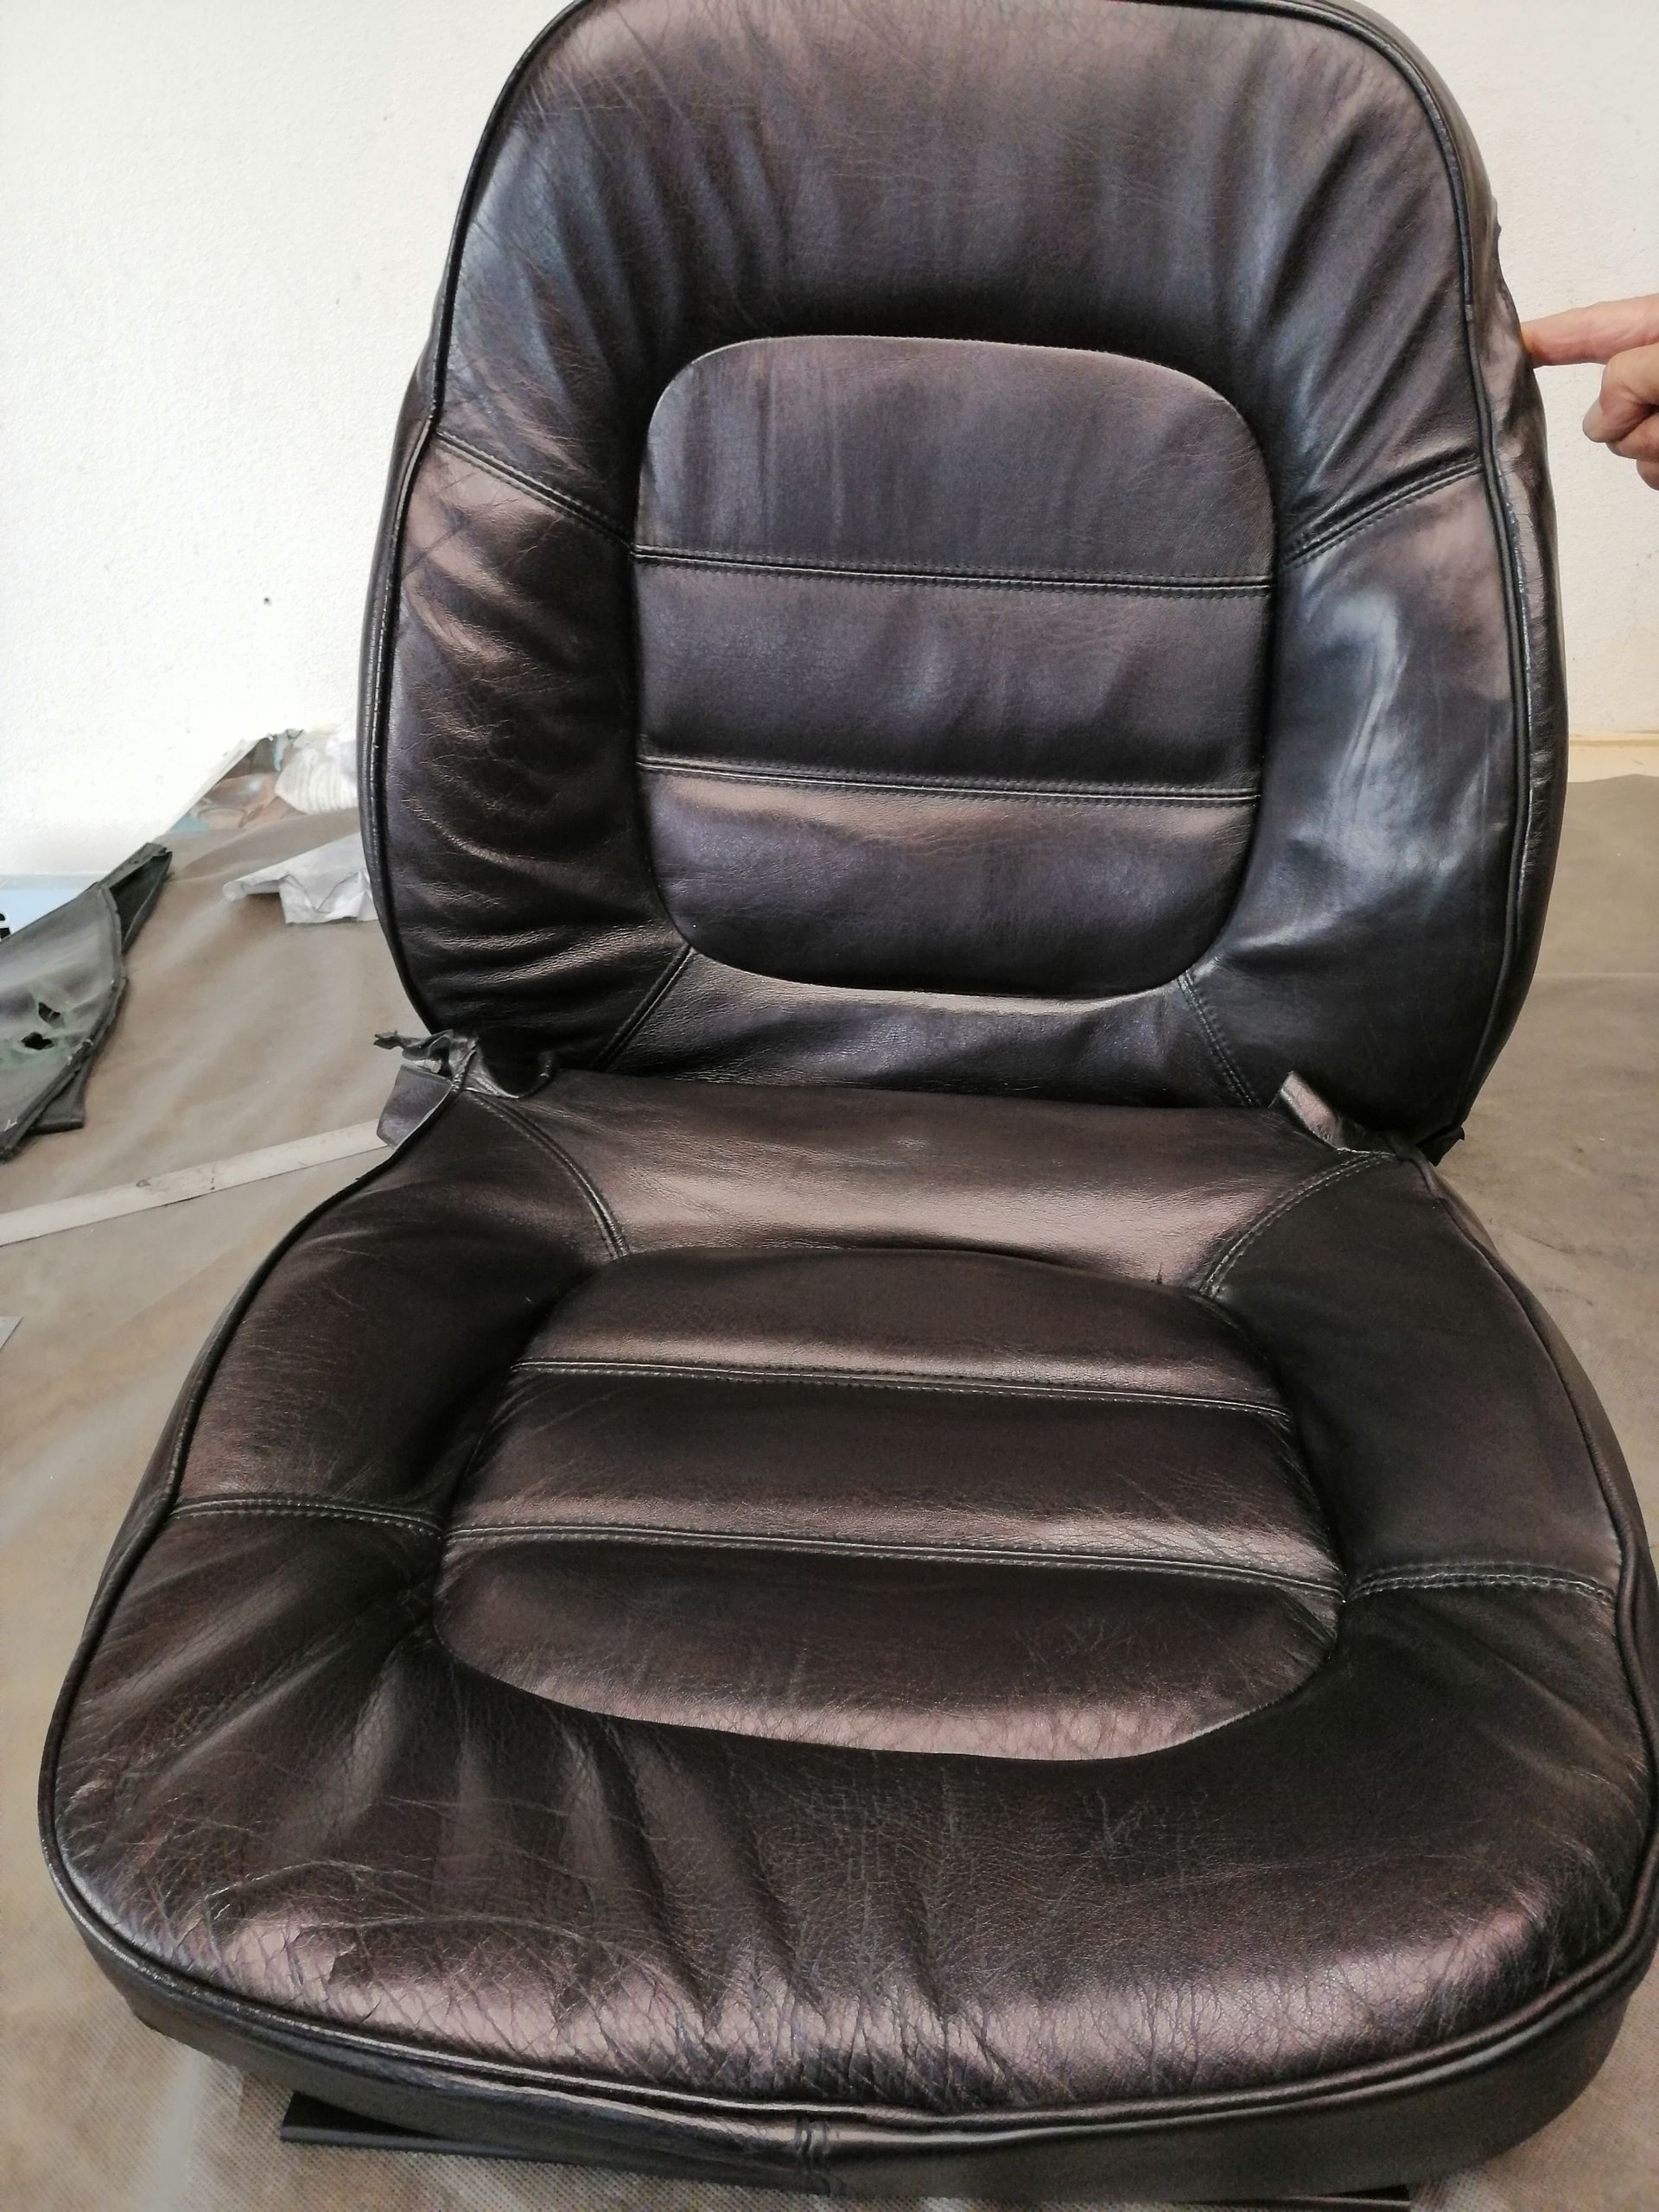 repair of a car leather seat